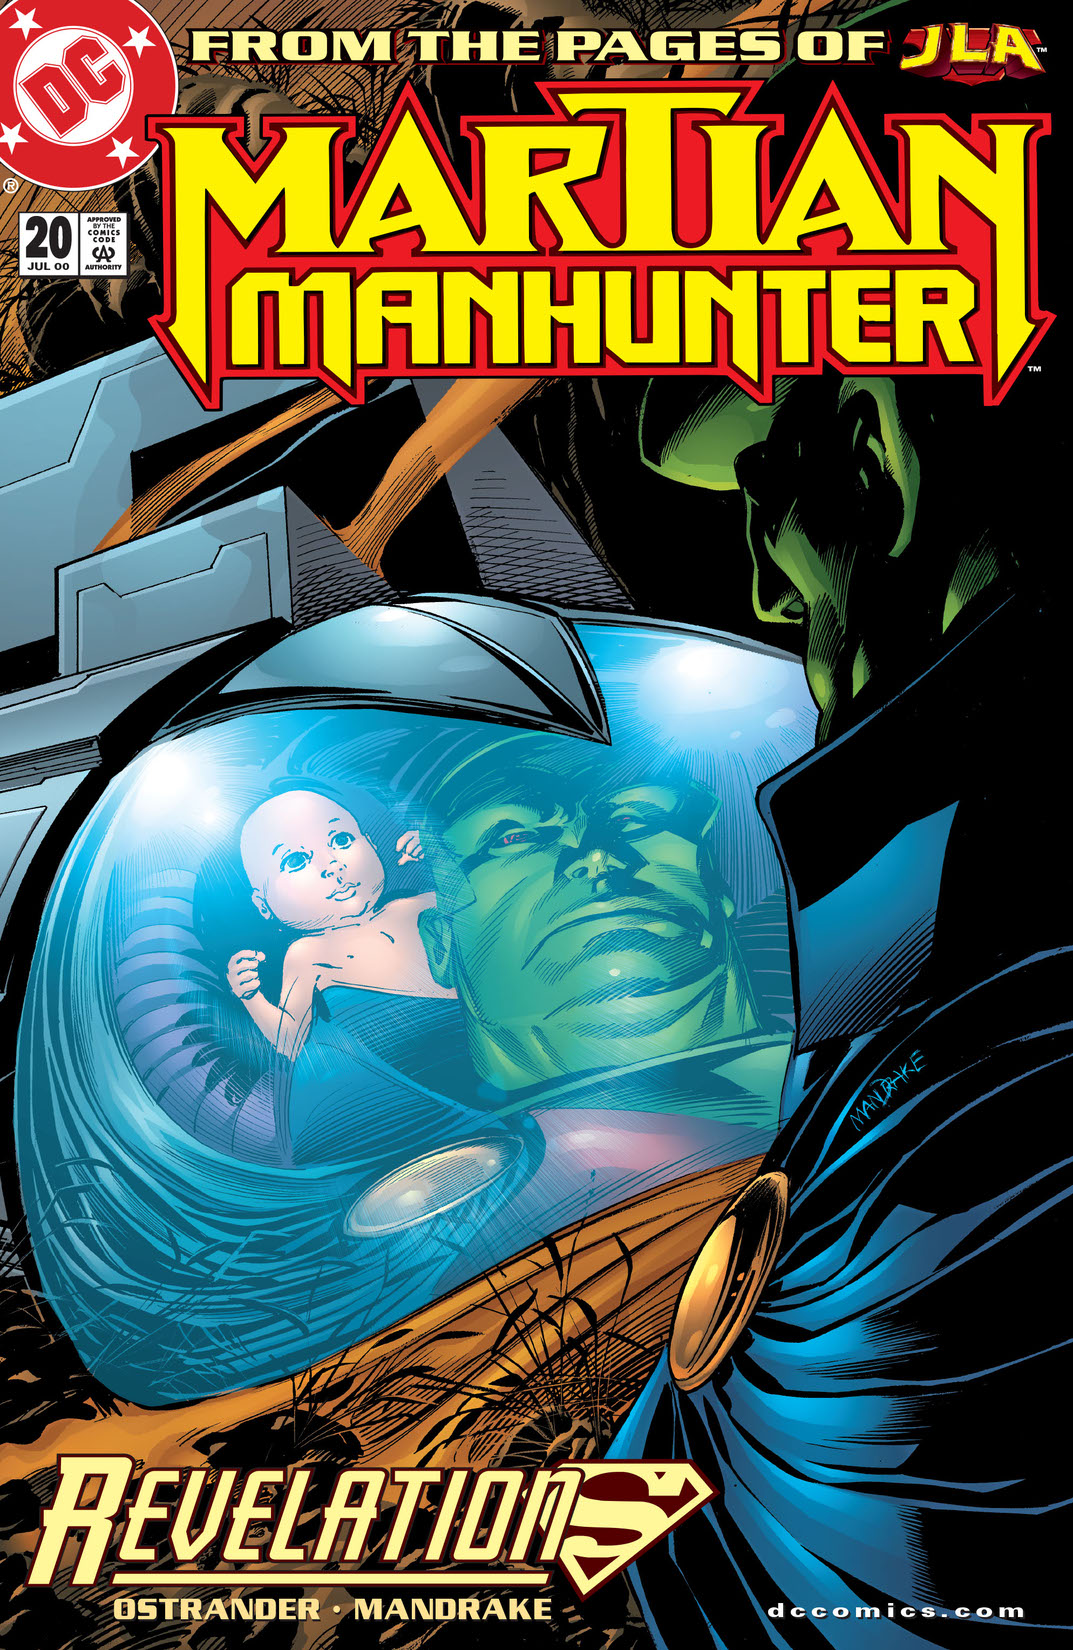 Martian Manhunter (1998-) #20 preview images